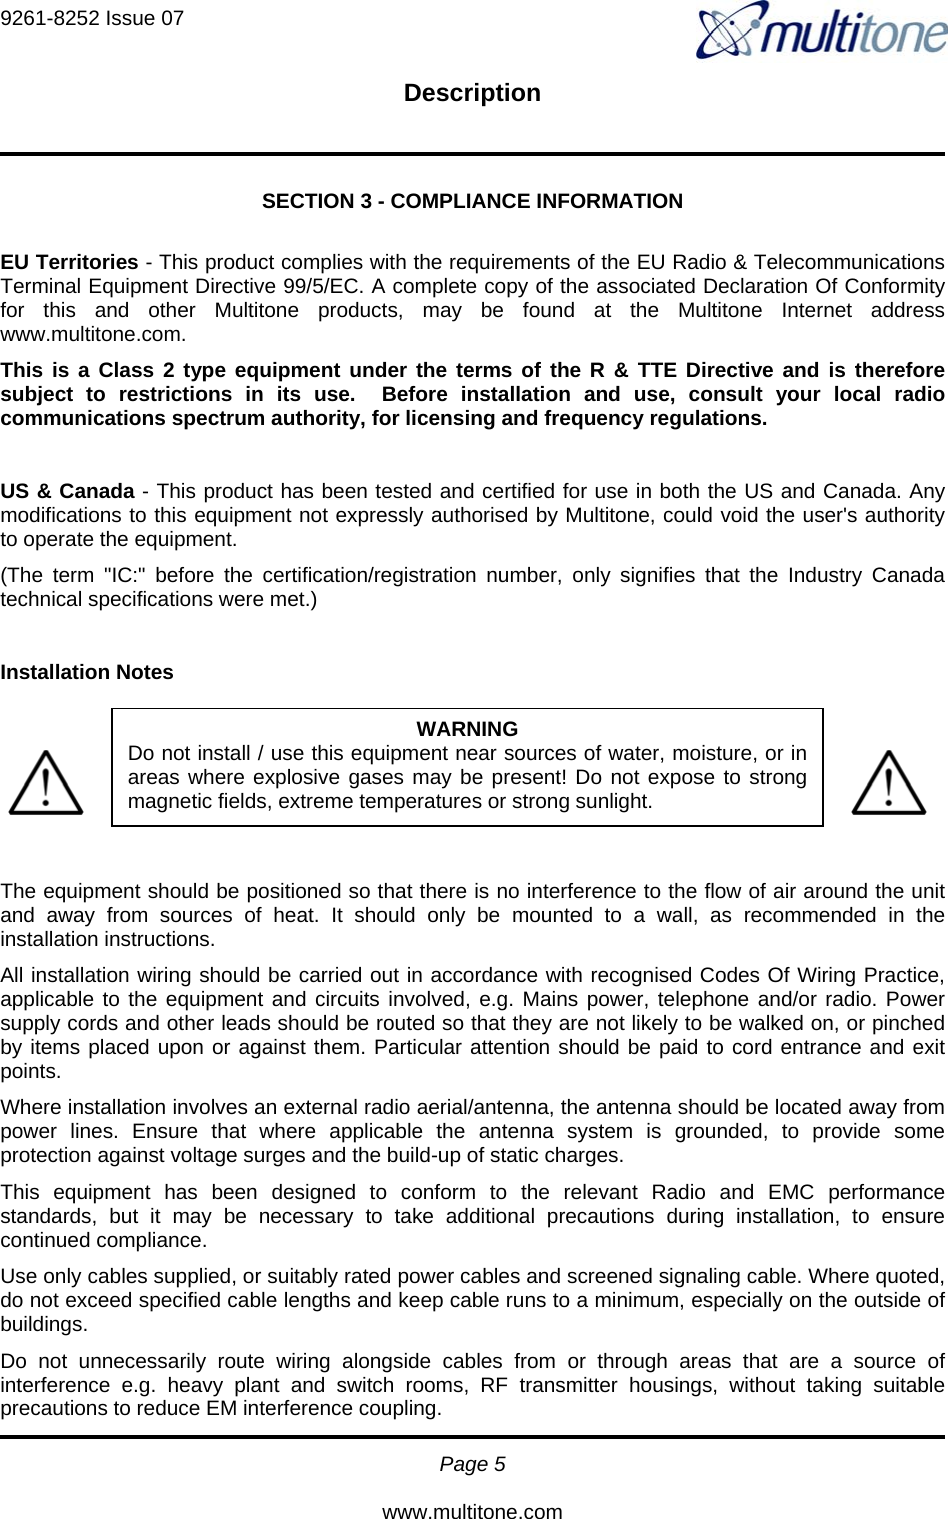 9261-8252 Issue 07   Description  Page 5  www.multitone.com SECTION 3 - COMPLIANCE INFORMATION  EU Territories - This product complies with the requirements of the EU Radio &amp; Telecommunications Terminal Equipment Directive 99/5/EC. A complete copy of the associated Declaration Of Conformity for this and other Multitone products, may be found at the Multitone Internet address www.multitone.com. This is a Class 2 type equipment under the terms of the R &amp; TTE Directive and is therefore subject to restrictions in its use.  Before installation and use, consult your local radio communications spectrum authority, for licensing and frequency regulations.  US &amp; Canada - This product has been tested and certified for use in both the US and Canada. Any modifications to this equipment not expressly authorised by Multitone, could void the user&apos;s authority to operate the equipment. (The term &quot;IC:&quot; before the certification/registration number, only signifies that the Industry Canada technical specifications were met.)  Installation Notes      The equipment should be positioned so that there is no interference to the flow of air around the unit and away from sources of heat. It should only be mounted to a wall, as recommended in the installation instructions. All installation wiring should be carried out in accordance with recognised Codes Of Wiring Practice, applicable to the equipment and circuits involved, e.g. Mains power, telephone and/or radio. Power supply cords and other leads should be routed so that they are not likely to be walked on, or pinched by items placed upon or against them. Particular attention should be paid to cord entrance and exit points. Where installation involves an external radio aerial/antenna, the antenna should be located away from power lines. Ensure that where applicable the antenna system is grounded, to provide some protection against voltage surges and the build-up of static charges. This equipment has been designed to conform to the relevant Radio and EMC performance standards, but it may be necessary to take additional precautions during installation, to ensure continued compliance. Use only cables supplied, or suitably rated power cables and screened signaling cable. Where quoted, do not exceed specified cable lengths and keep cable runs to a minimum, especially on the outside of buildings. Do not unnecessarily route wiring alongside cables from or through areas that are a source of interference e.g. heavy plant and switch rooms, RF transmitter housings, without taking suitable precautions to reduce EM interference coupling. WARNING Do not install / use this equipment near sources of water, moisture, or inareas where explosive gases may be present! Do not expose to strongmagnetic fields, extreme temperatures or strong sunlight. 